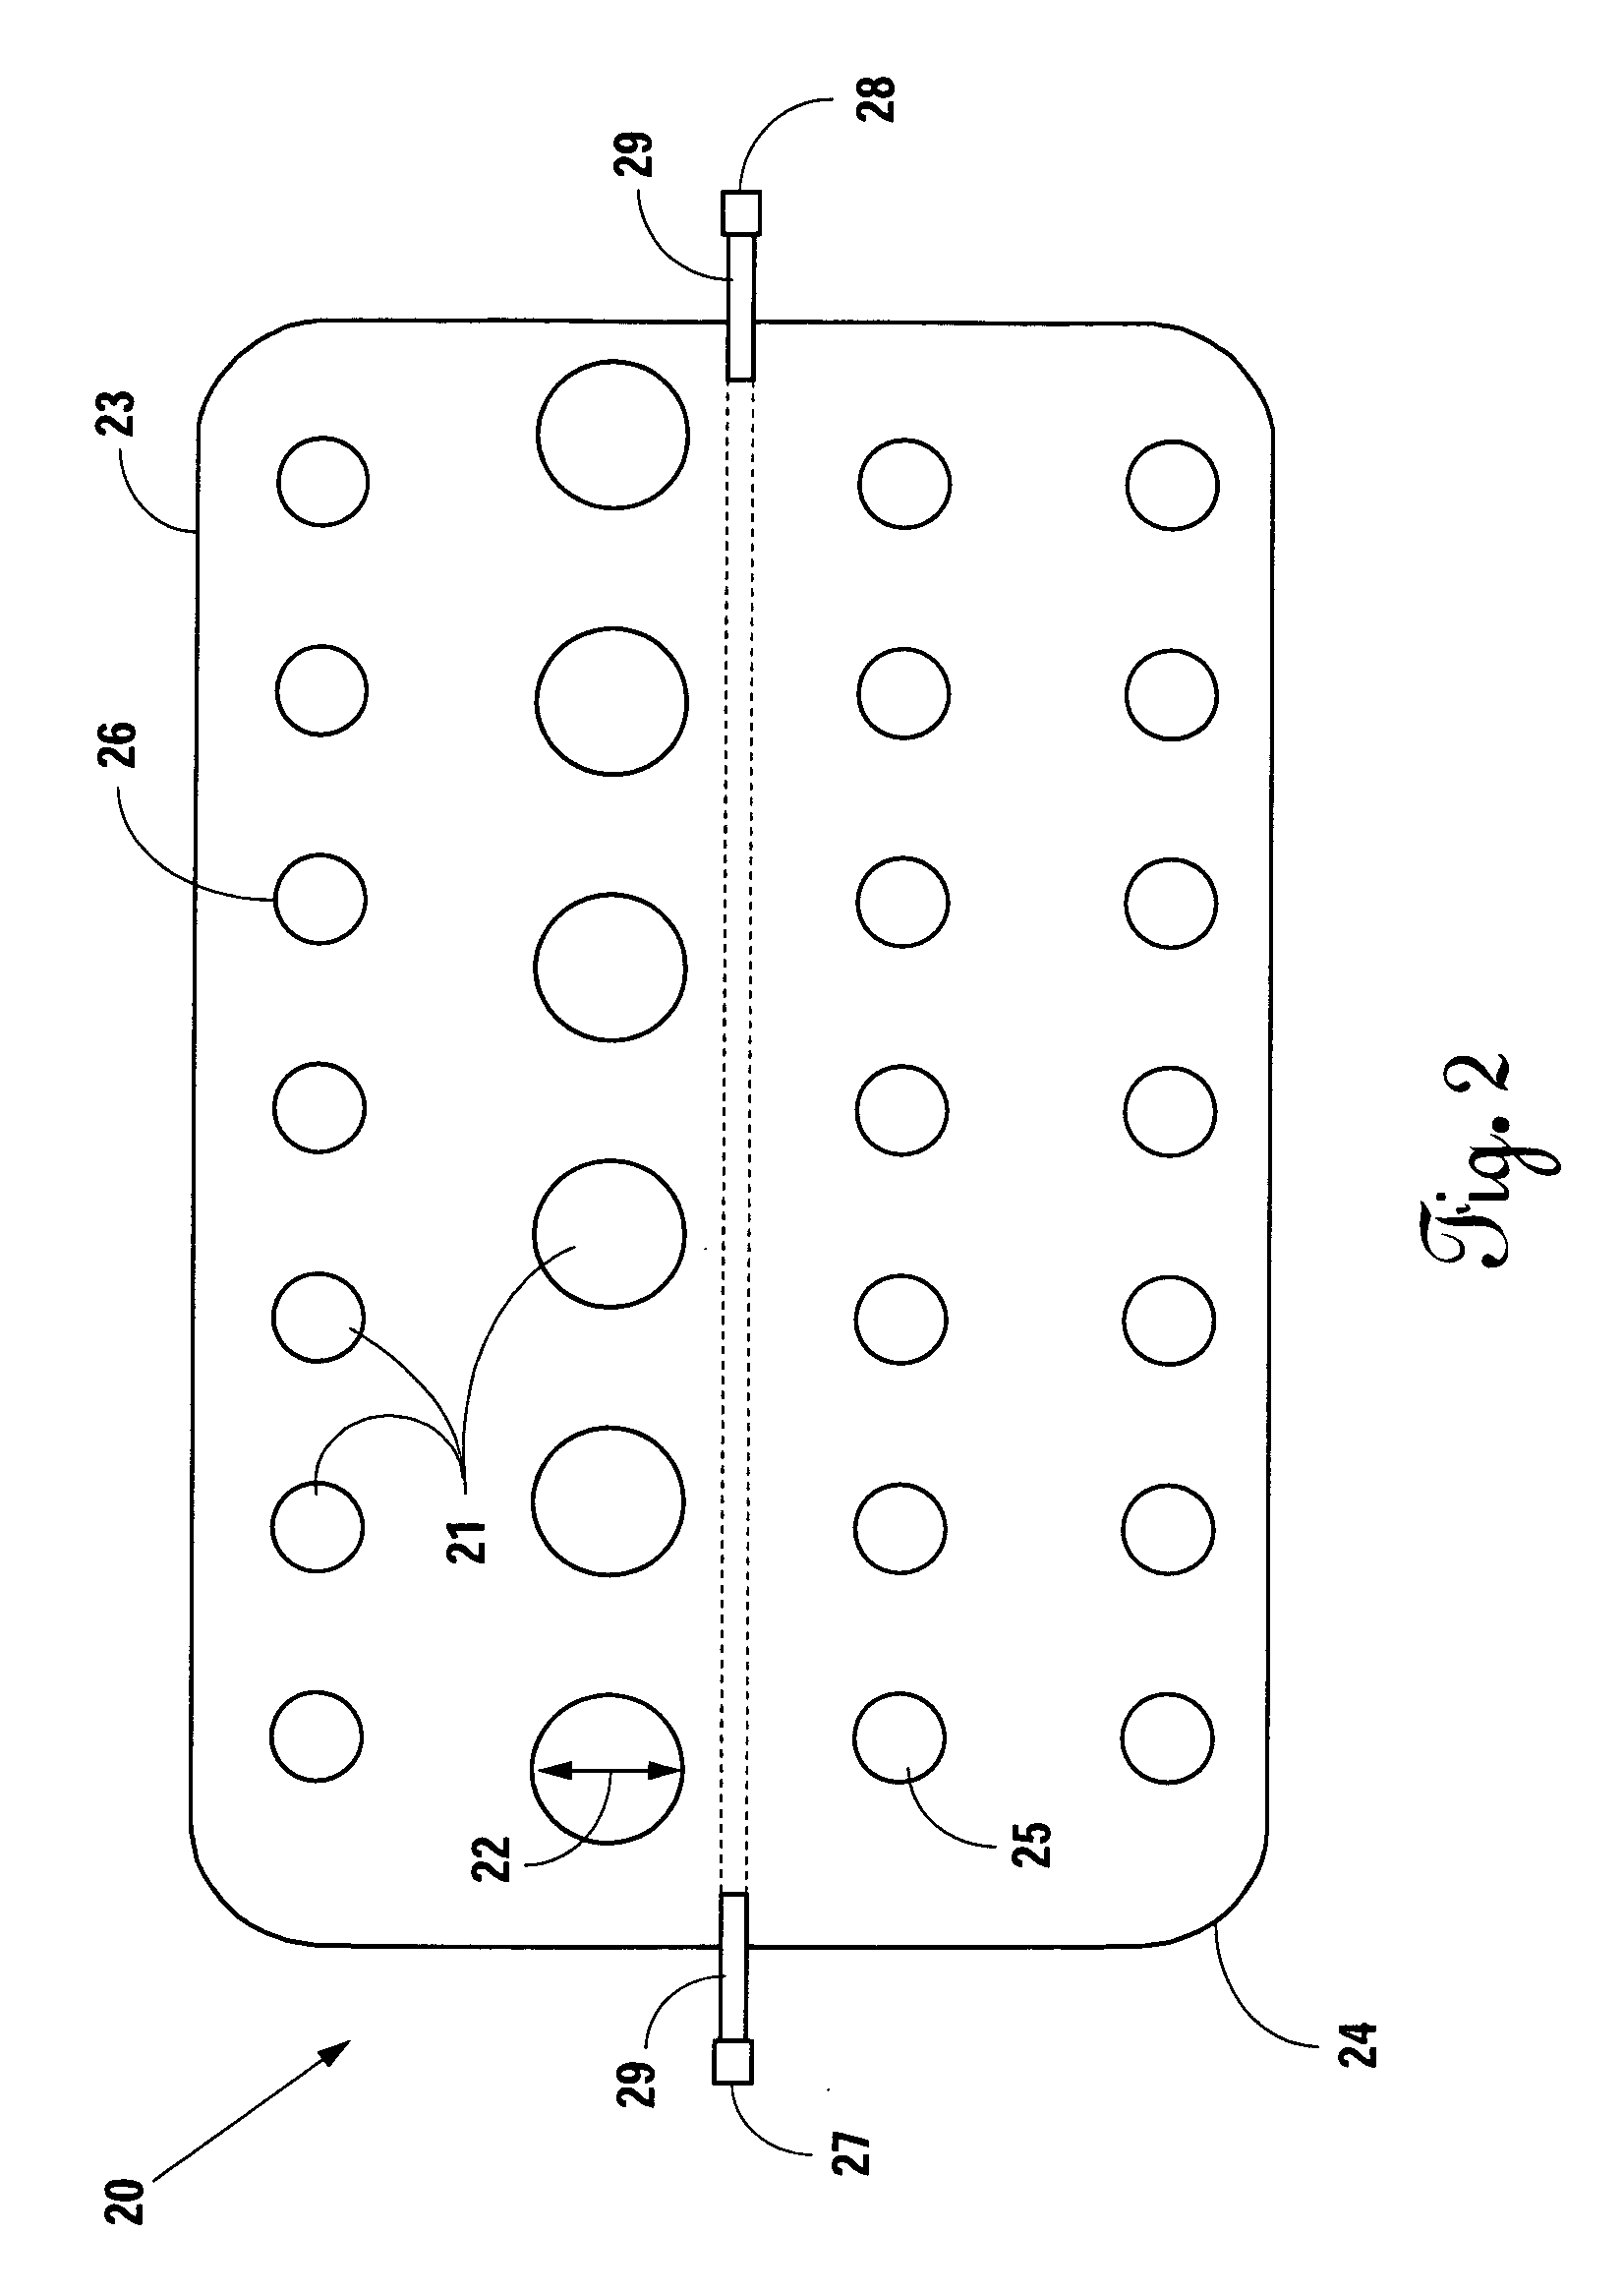 Portable Apparatus for Promoting and Containing Plant Growth